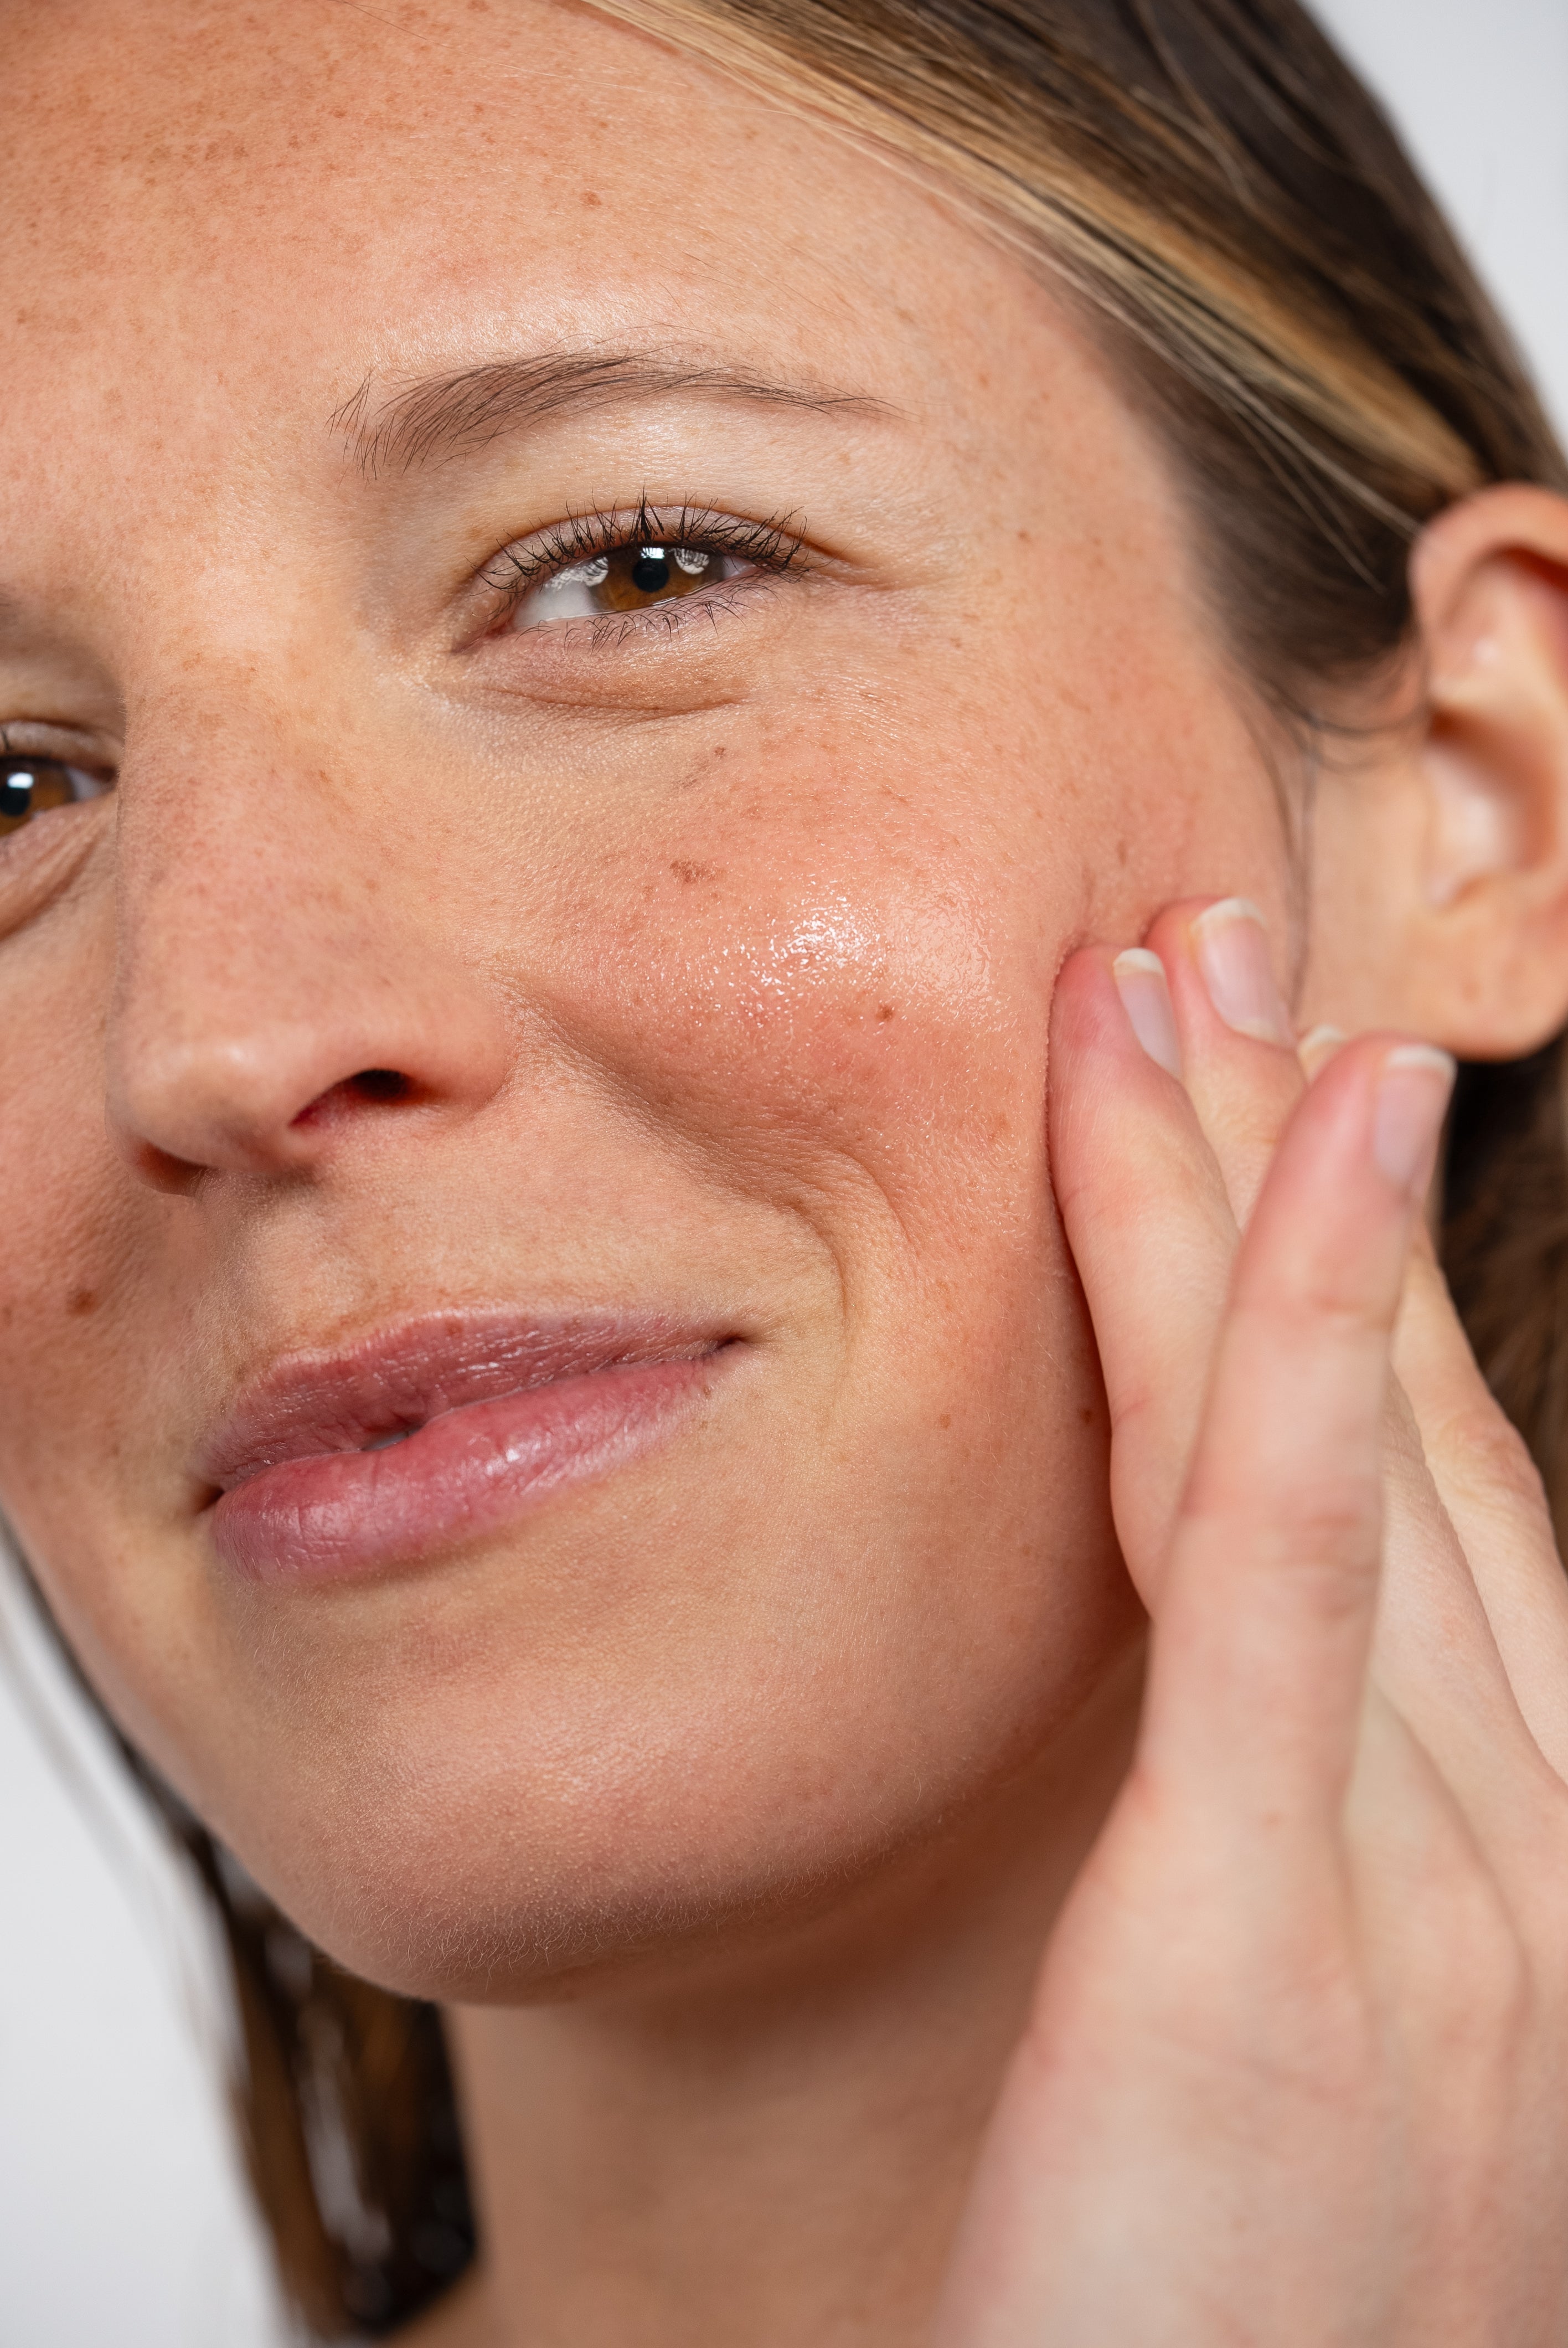 Does the sun accentuate the signs of skin ageing?